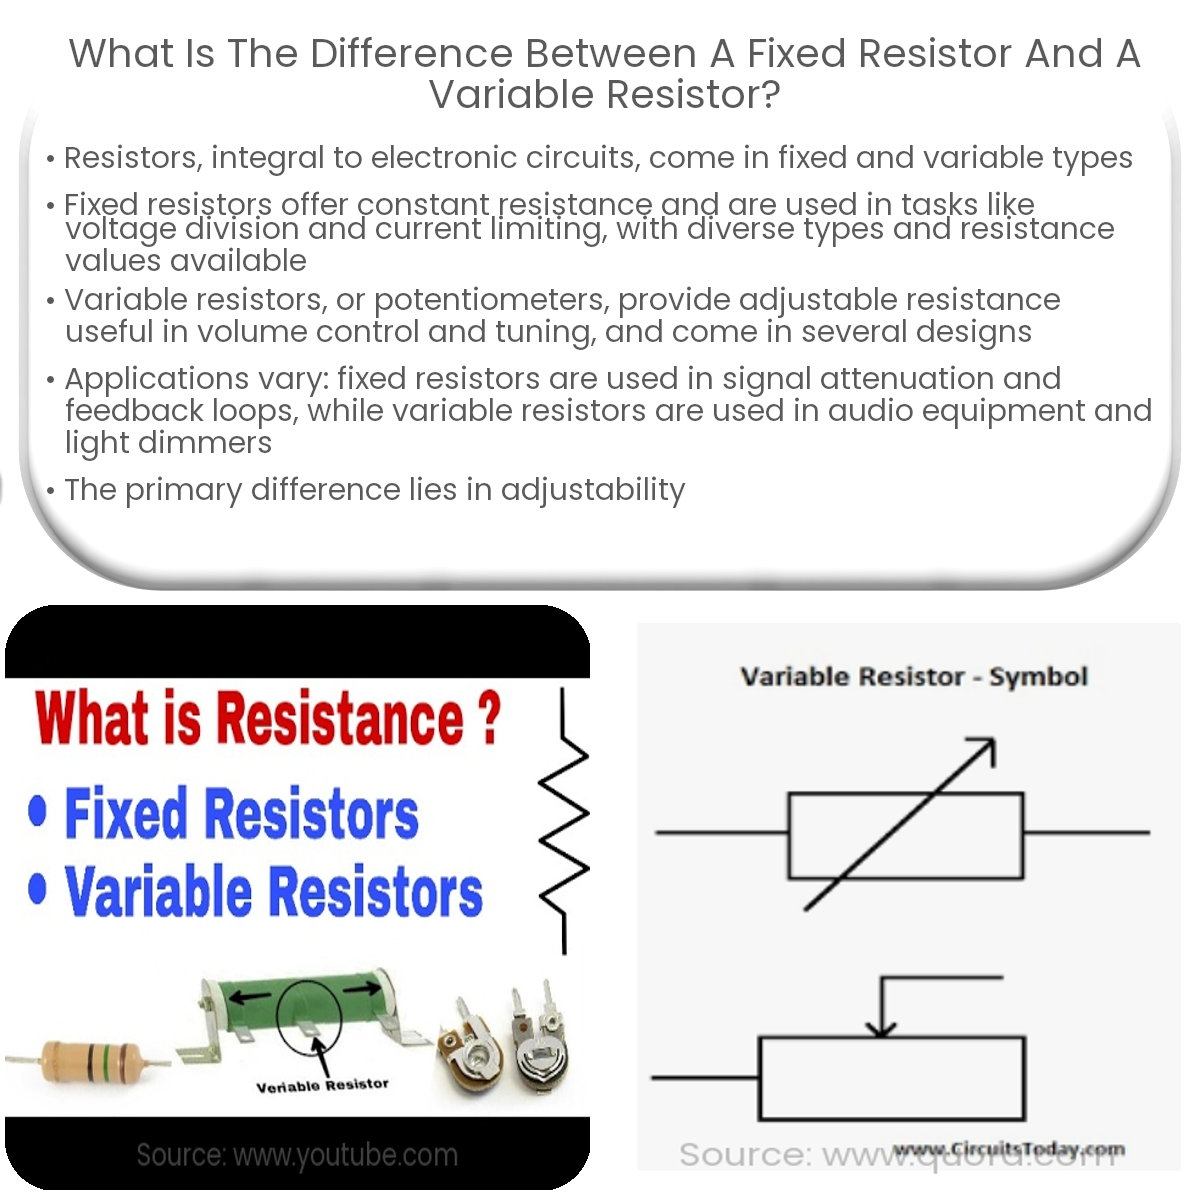 https://www.electricity-magnetism.org/wp-content/uploads/2023/06/what-is-the-difference-between-a-fixed-resistor-and-a-variable-resistor.png